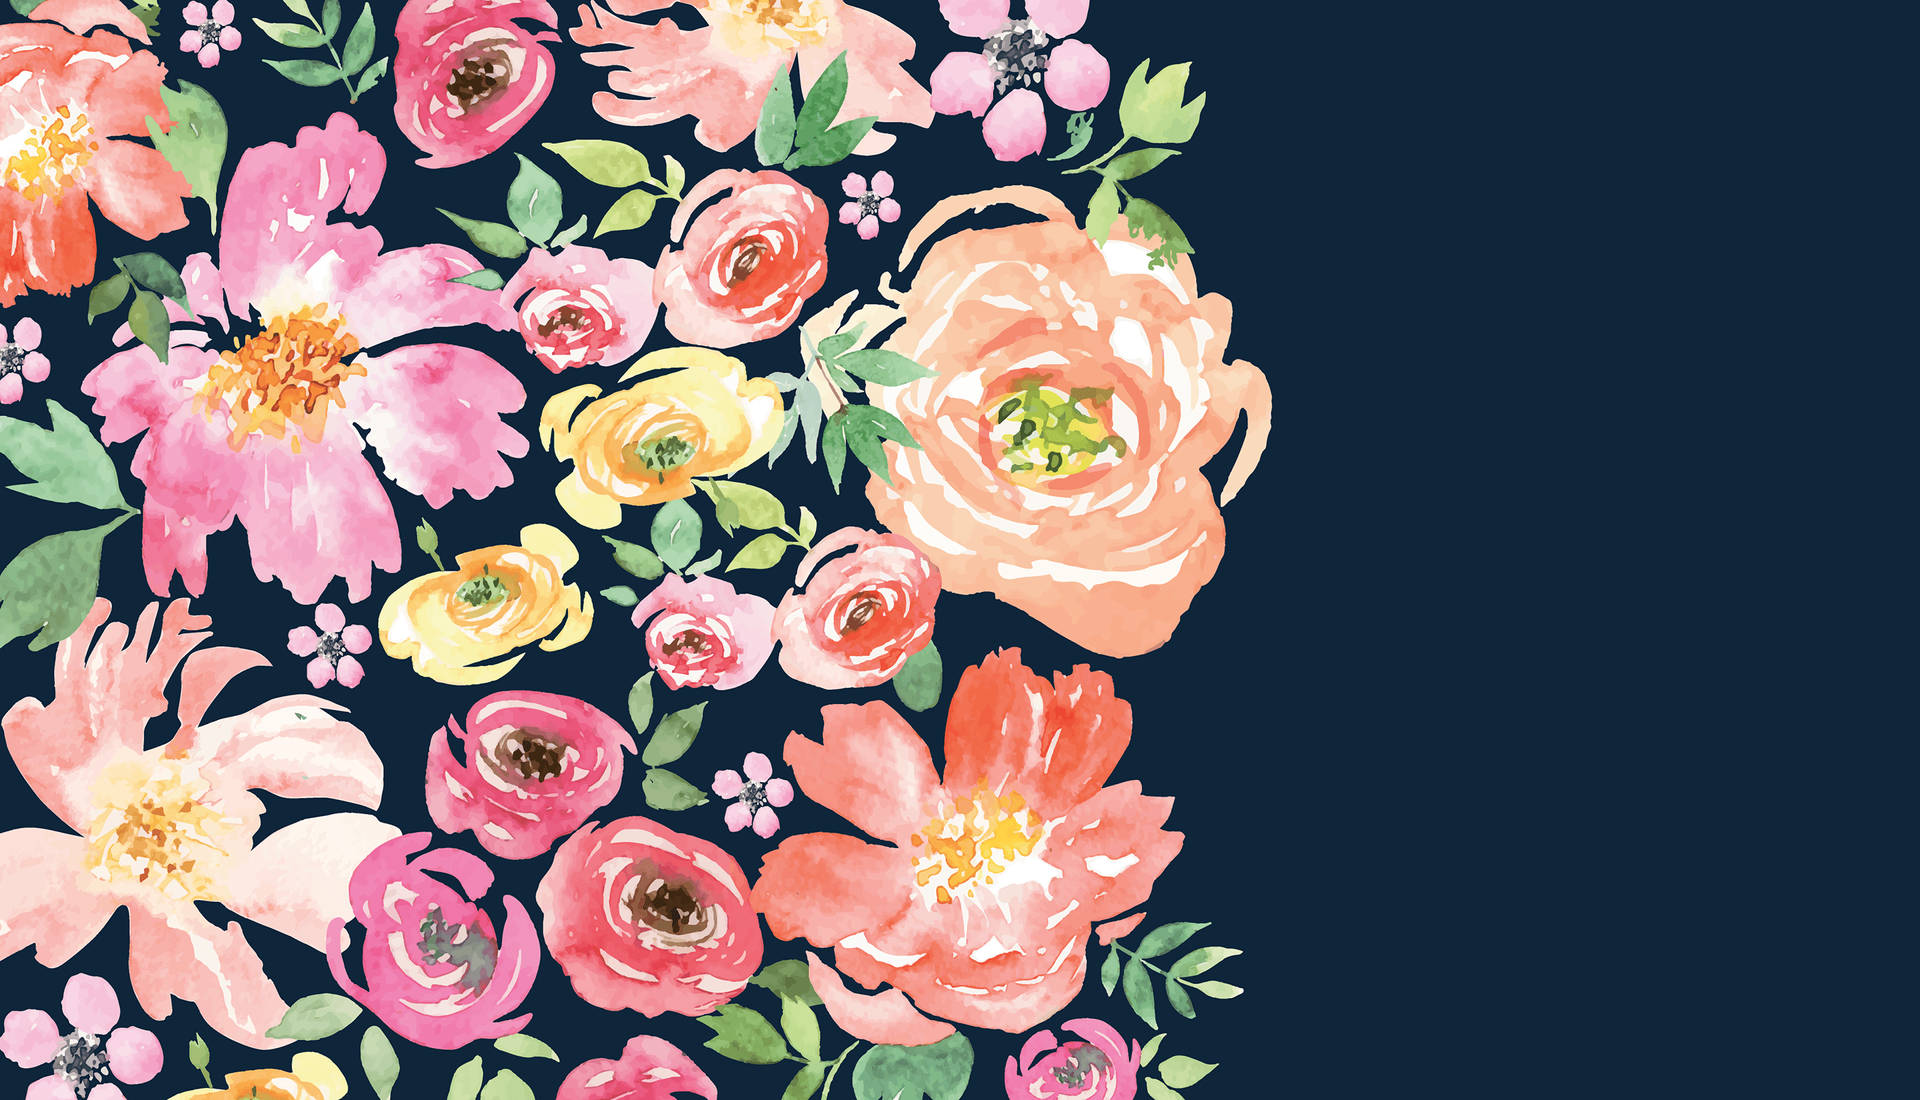 Floral Themed Watercolor Painting Wallpaper